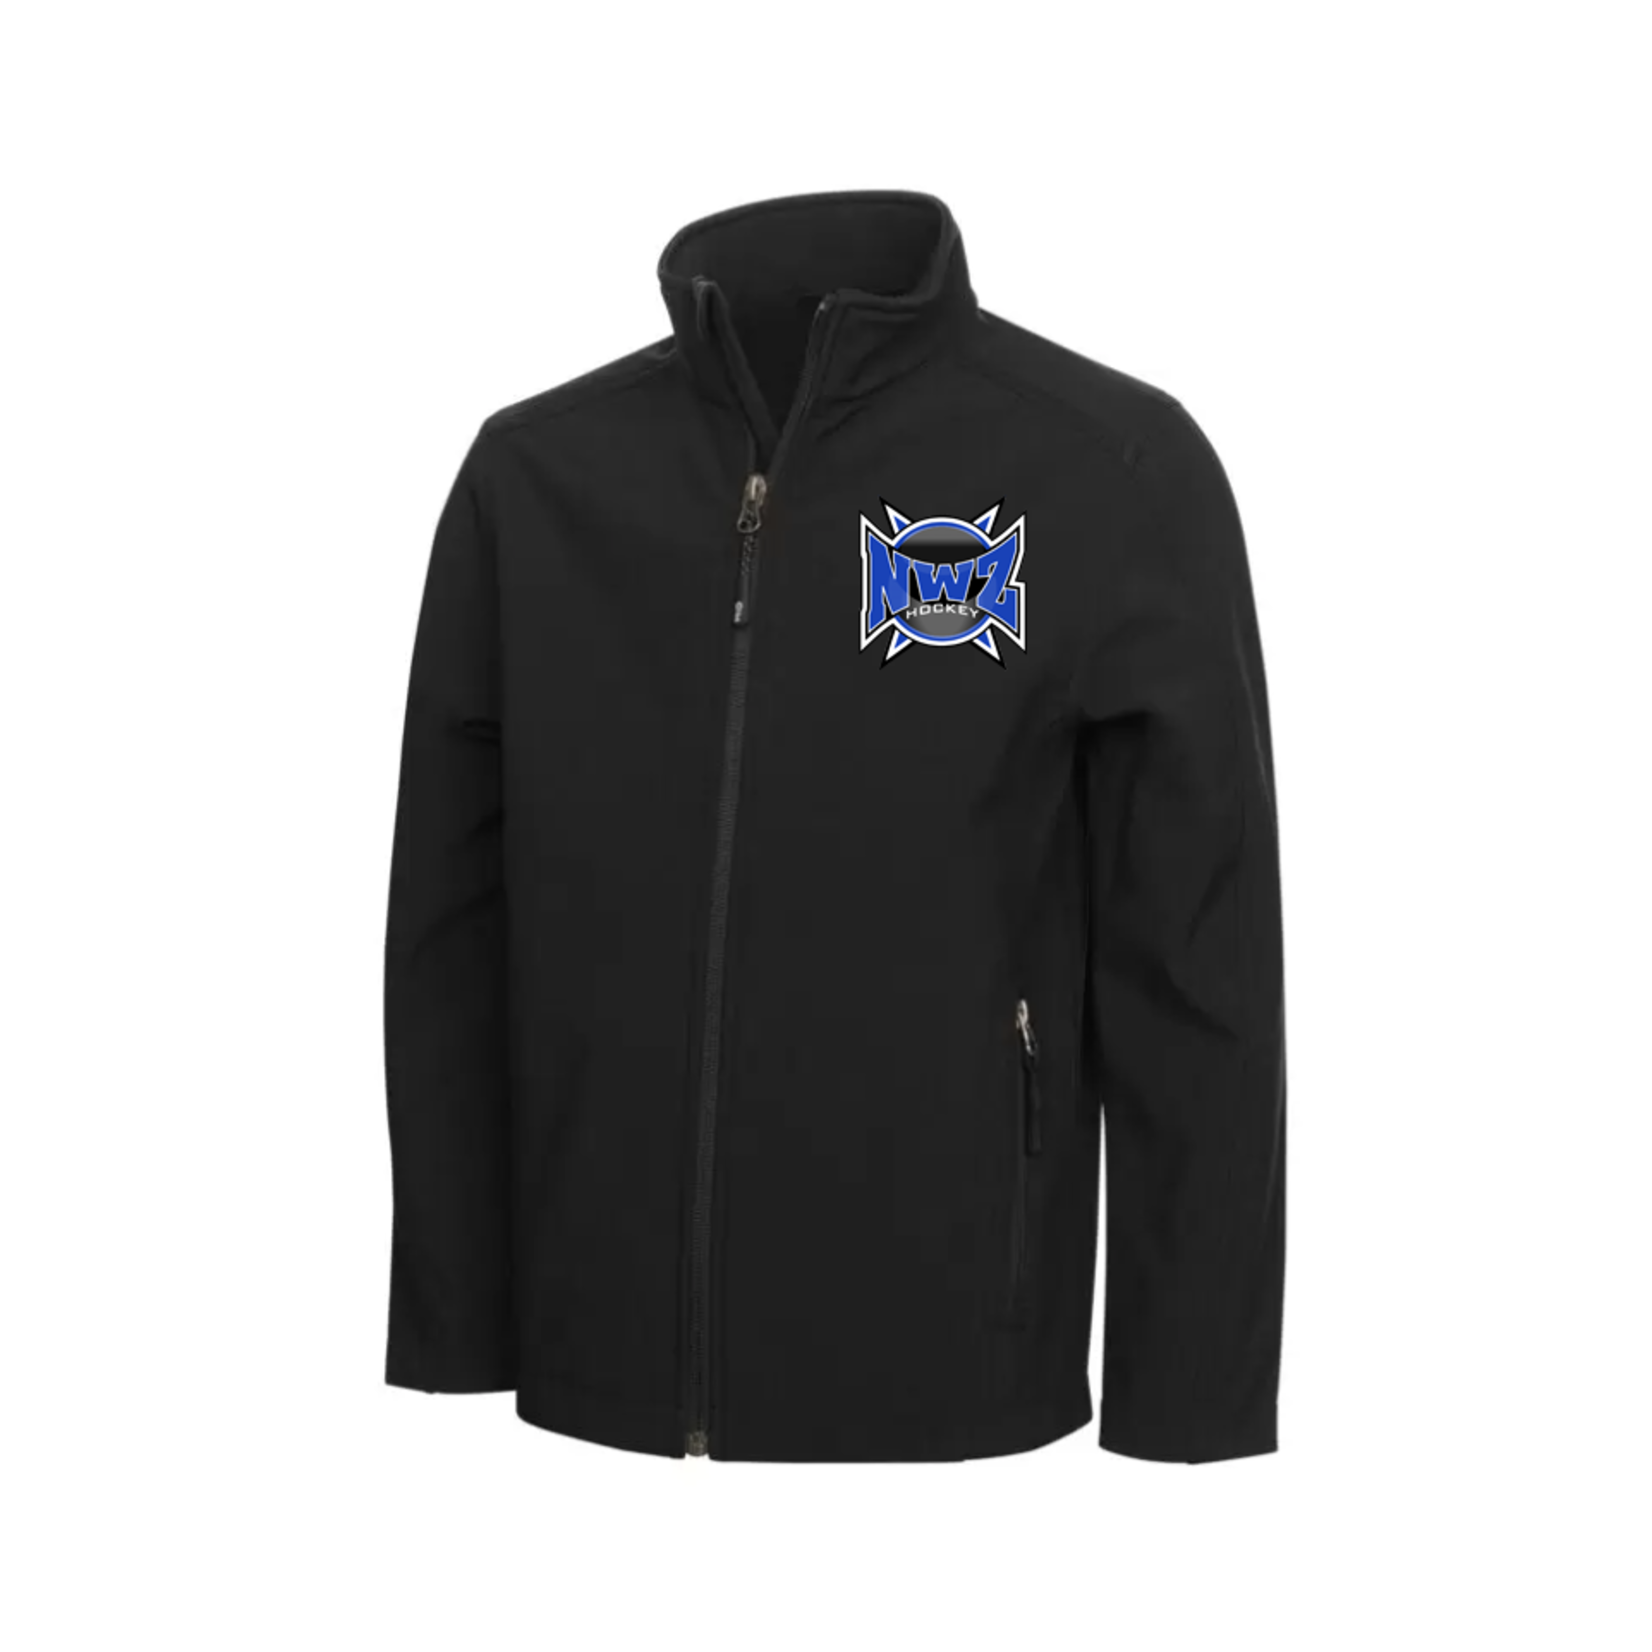 Coal Harbour NWZ Youth Soft Shell Jacket